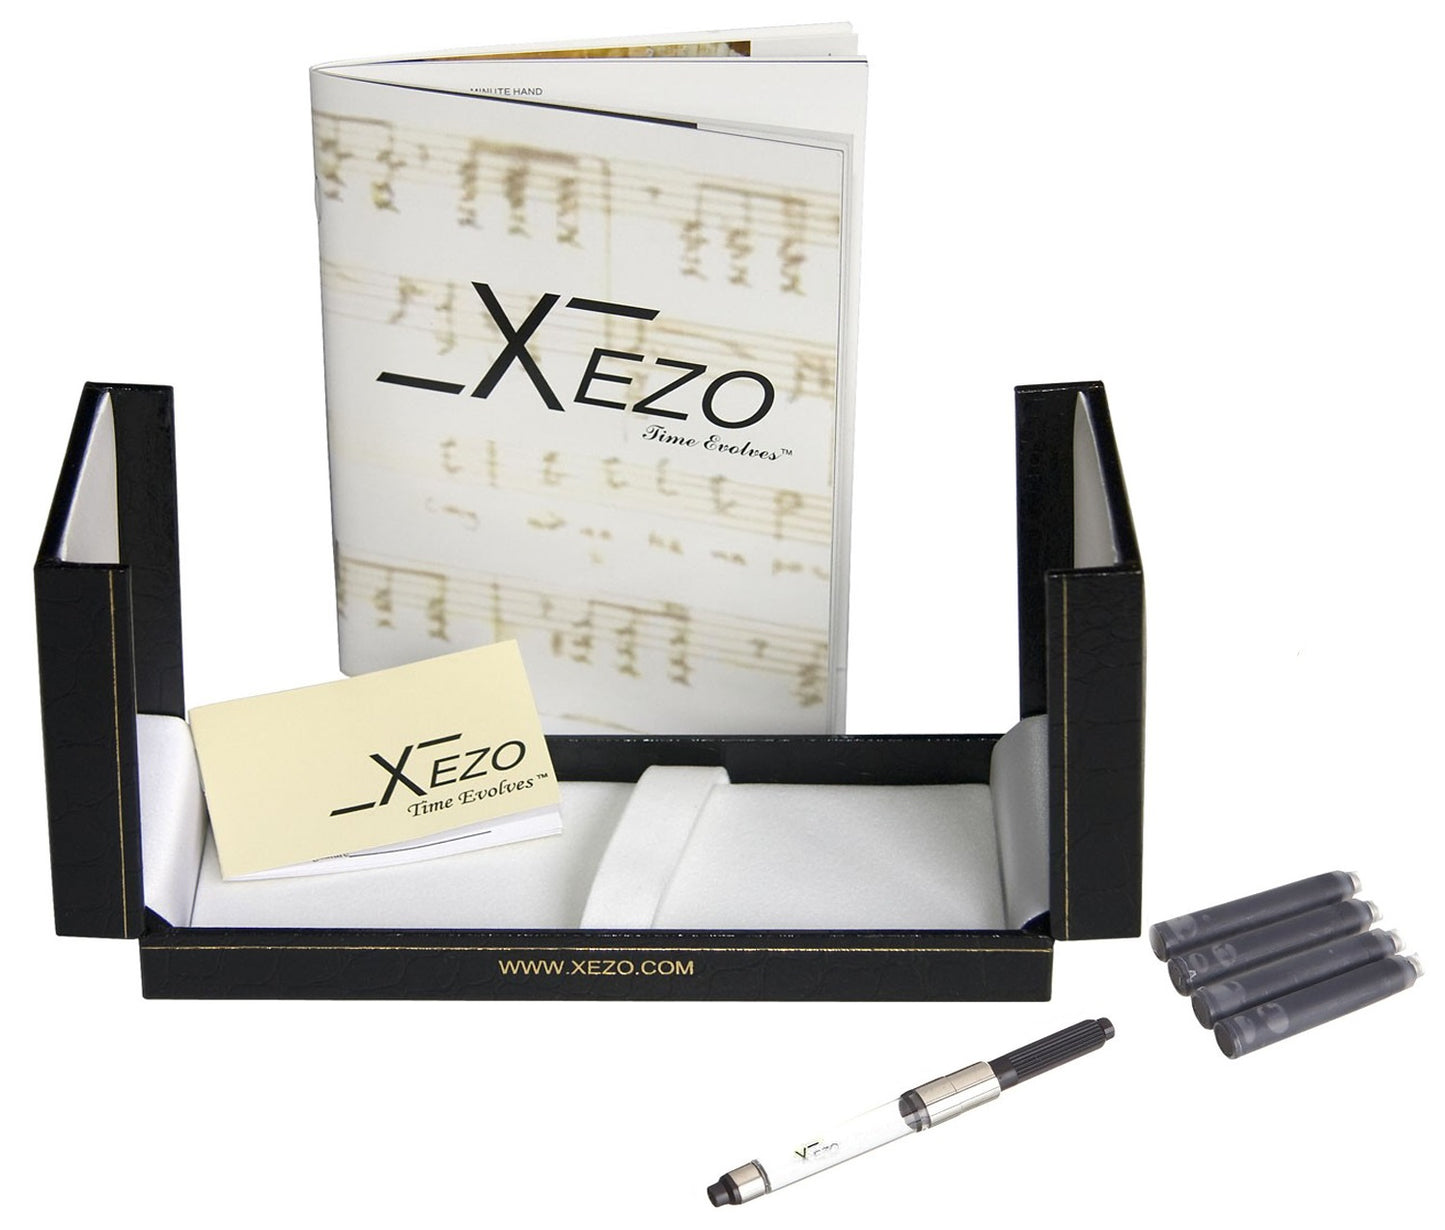 Xezo - Black gift box, certificate, manual, chrome-plated ink converter, and four ink cartridges of the Tribune 925 Sterling Silver FM fountain pen